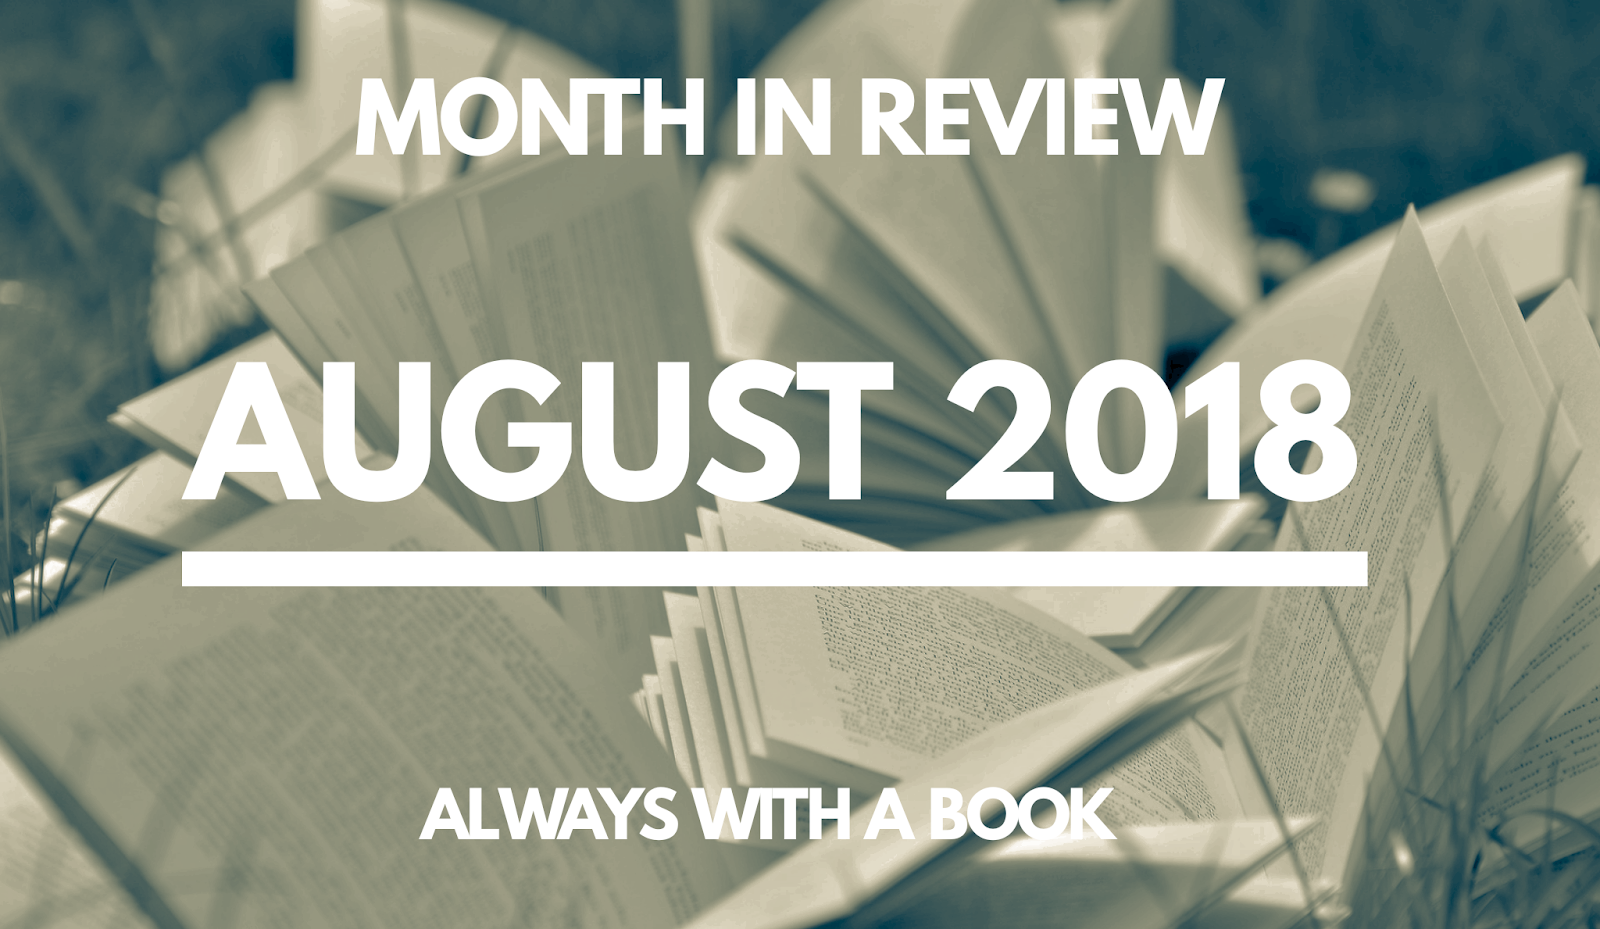 Month in Review: August 2018